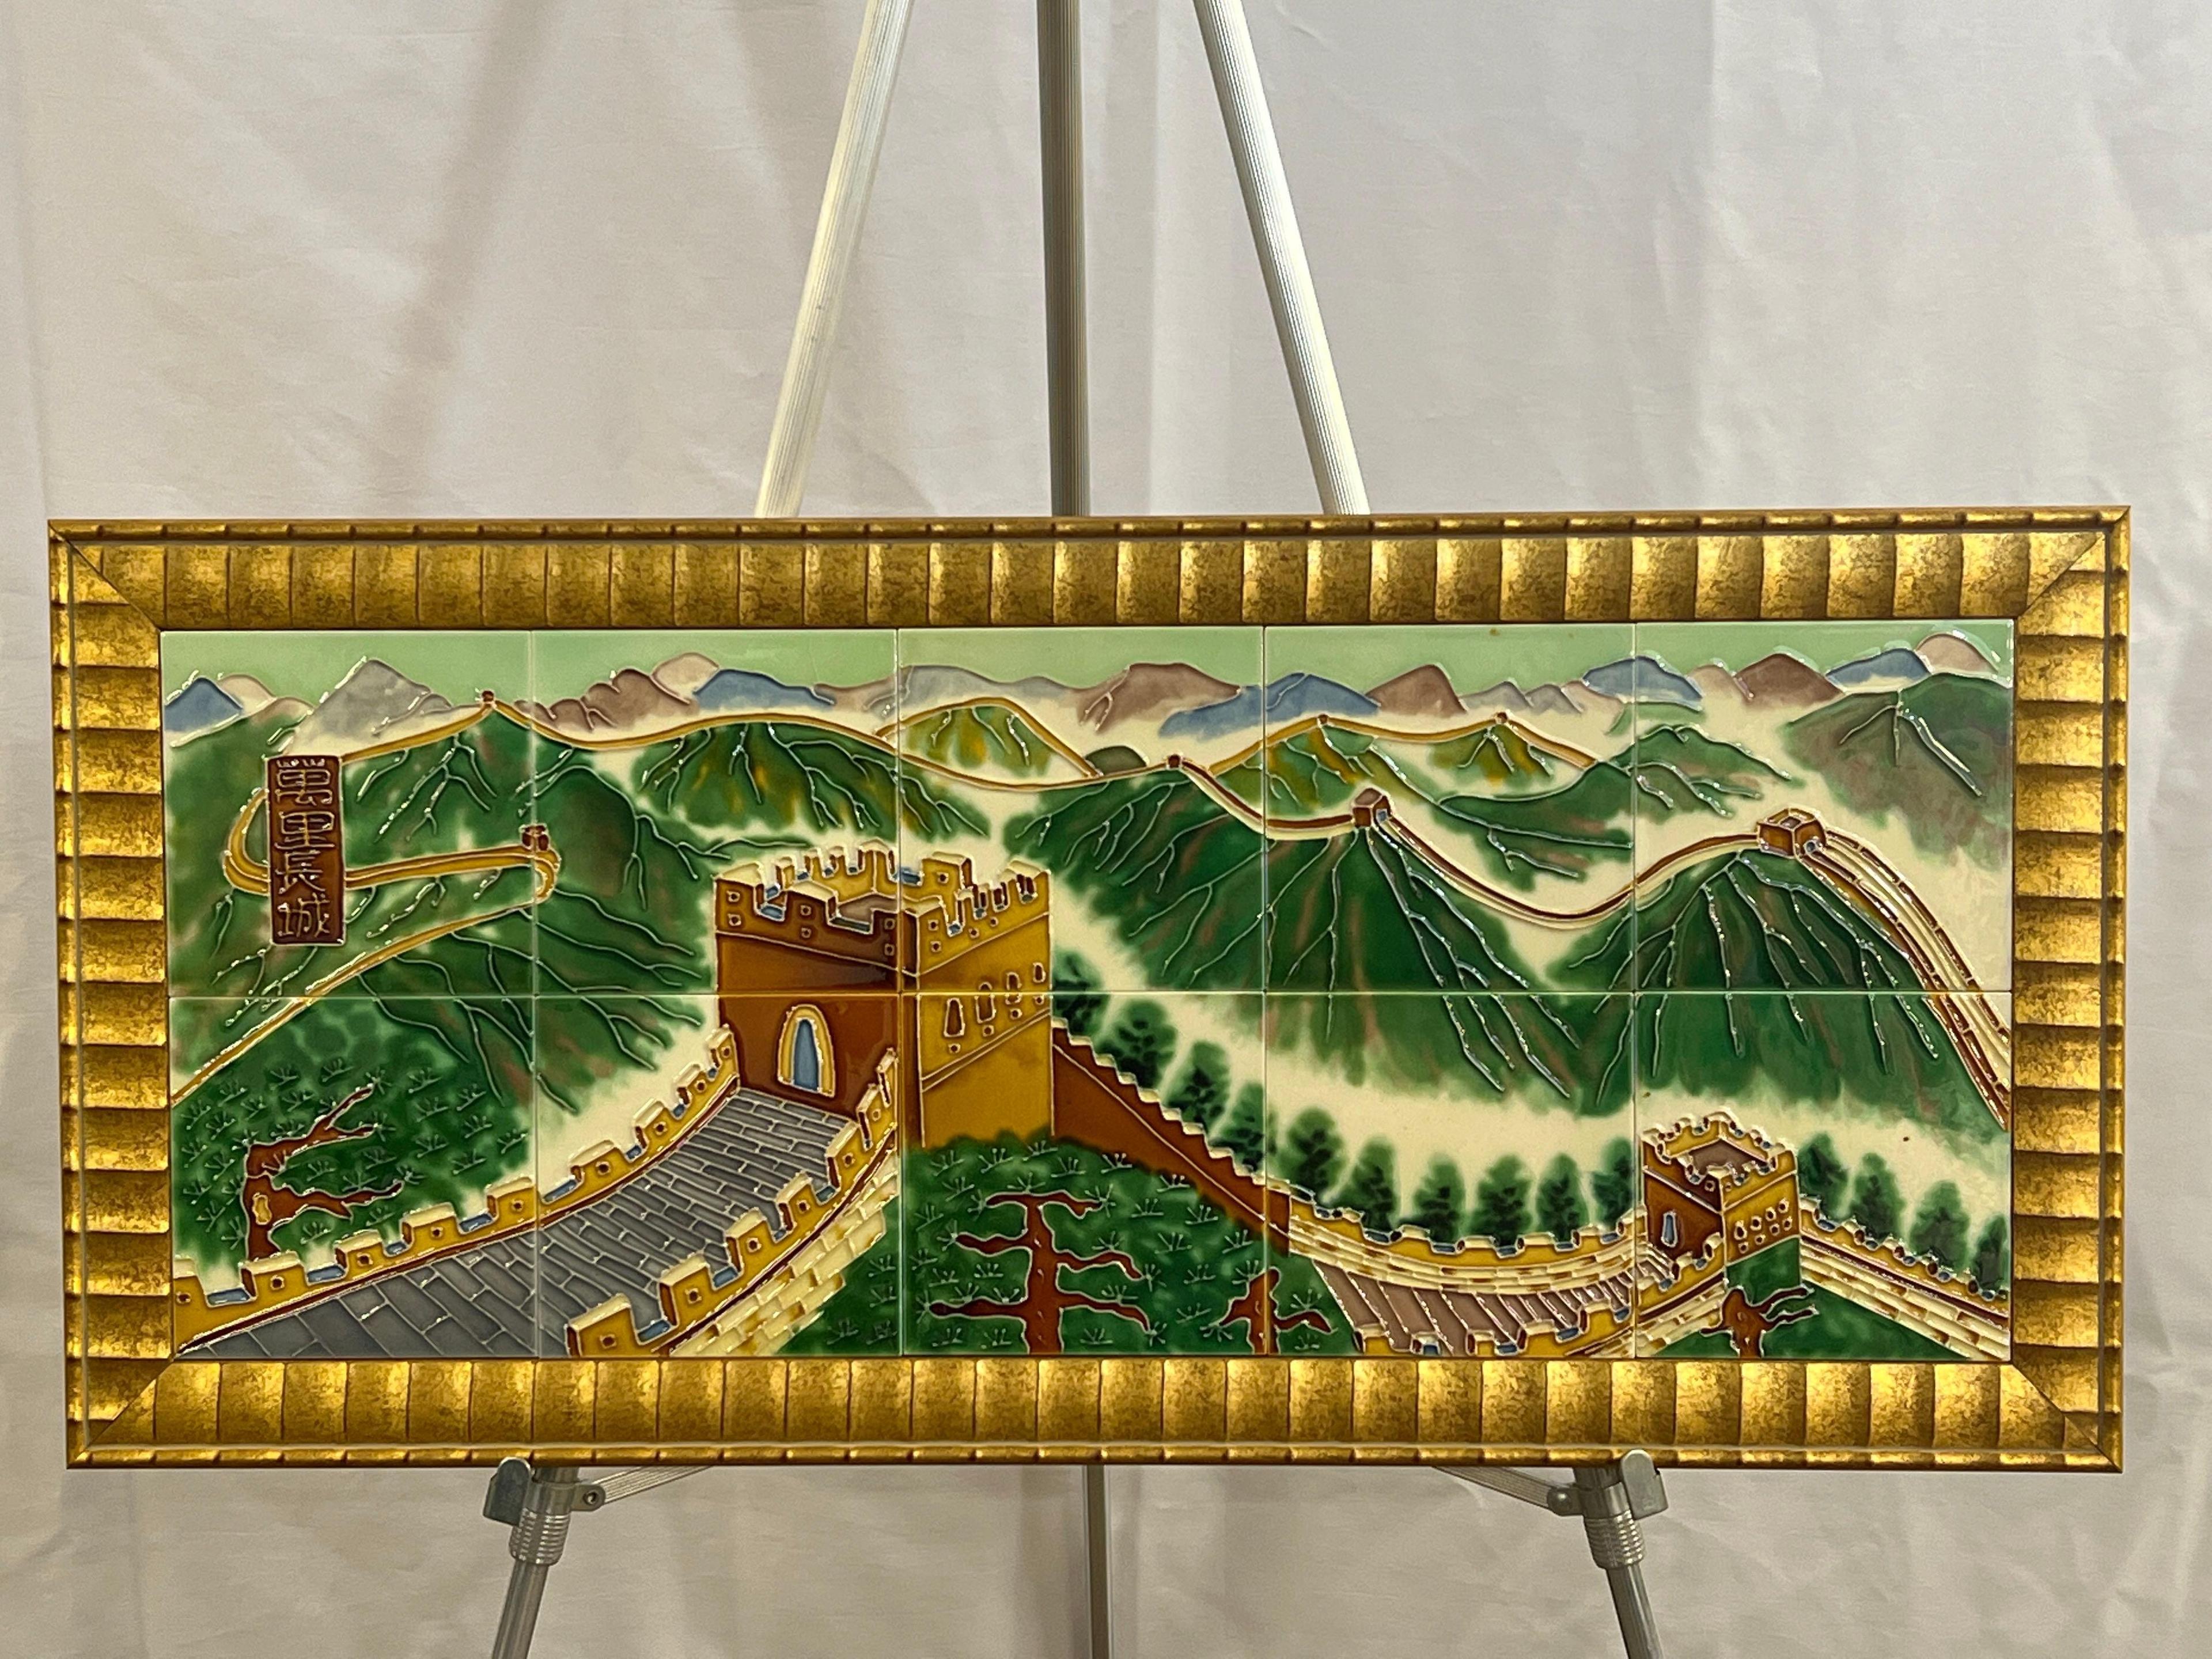 Framed Ten Tile Mural depicting the Great Wall of China